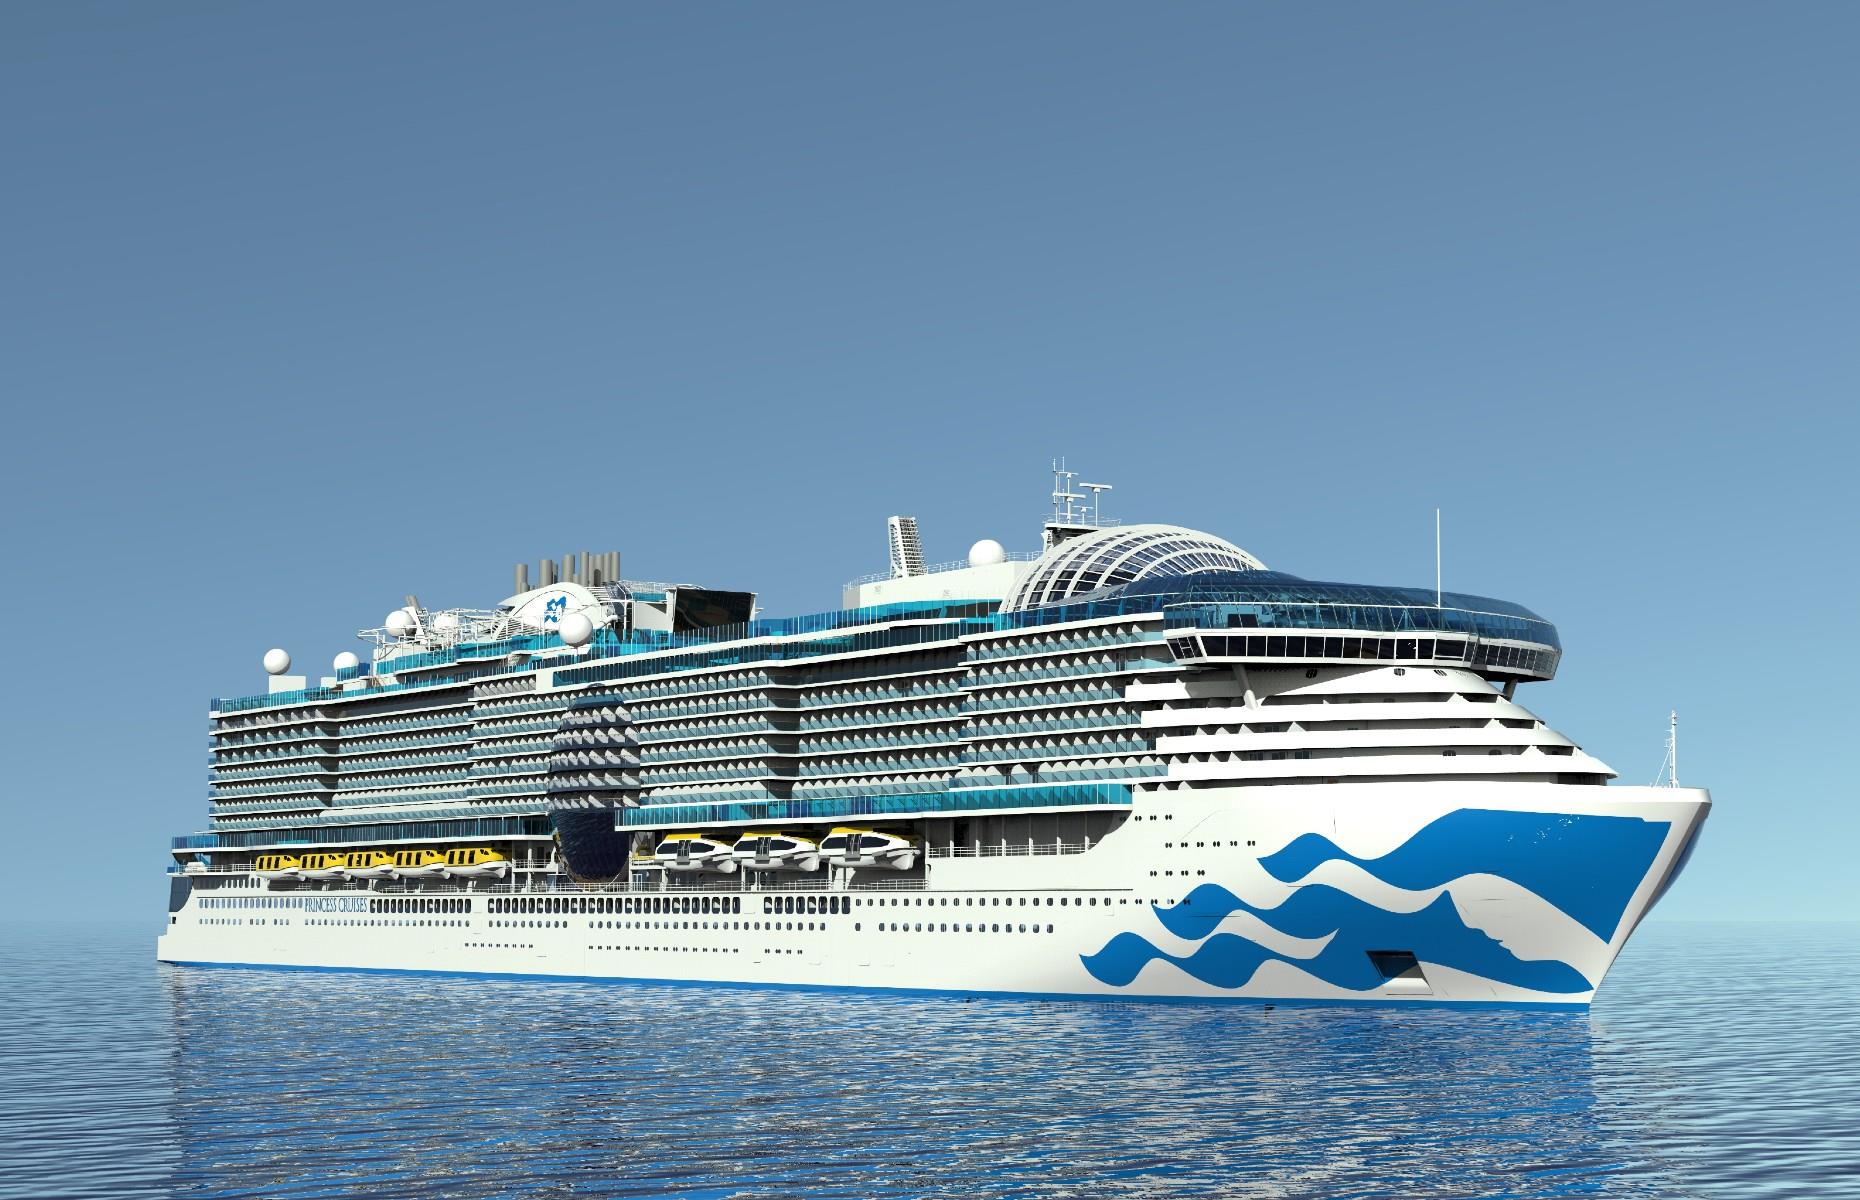 <p>When Sun Princess launches in 2024, she will be Princess Cruises’ largest (and 16th) ship, with room for 4,300 passengers. Currently under construction in Italy, Sea Princess will pay tribute to Europe’s ship-building heritage, with public spaces inspired by Santorini’s famous terraces and the beautiful Piazza found on Princess’s other ships. </p>